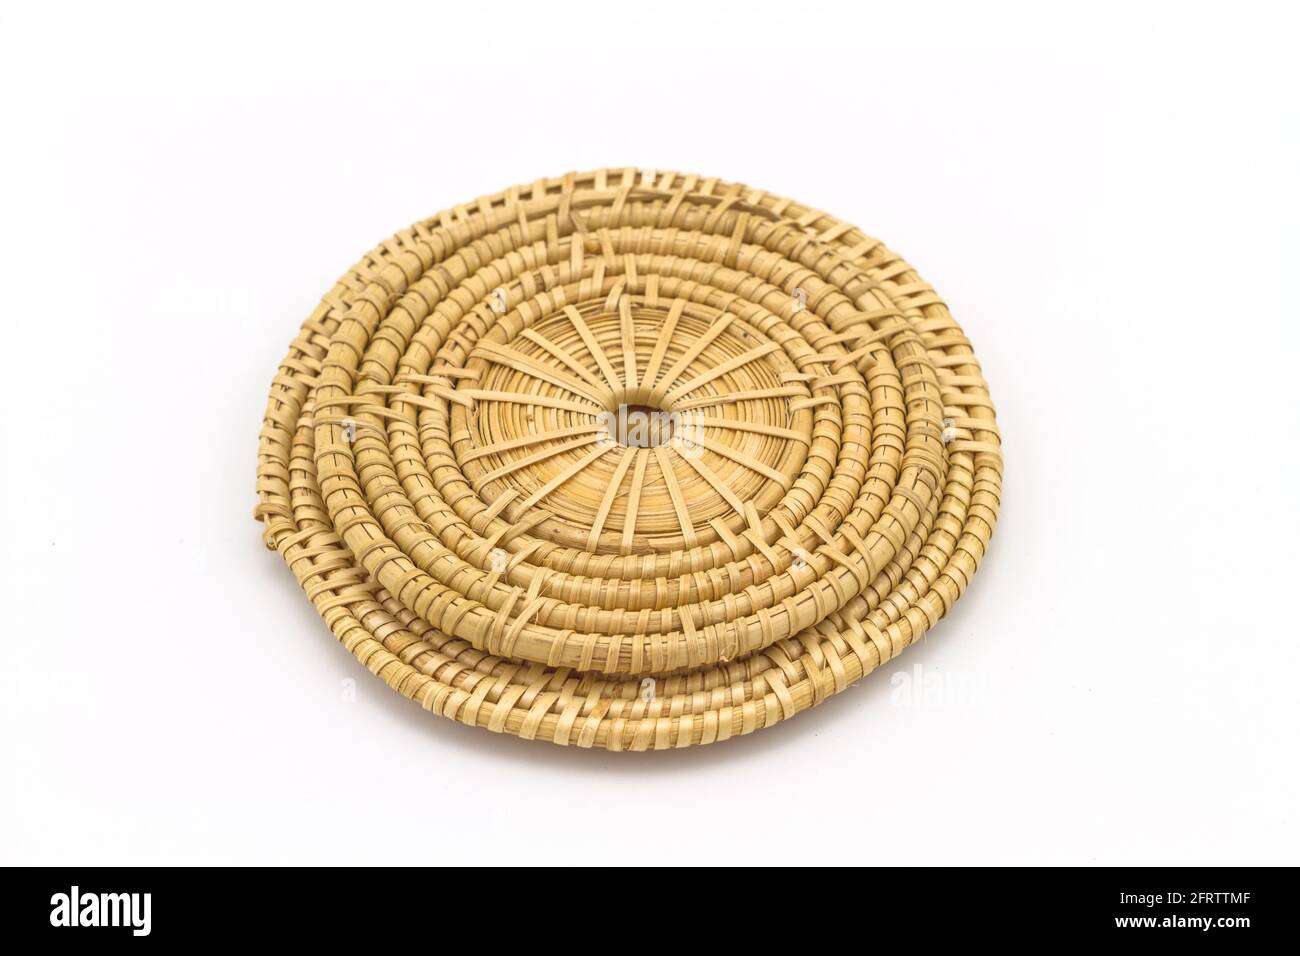 Rattan weave mat on a white background Stock Photo